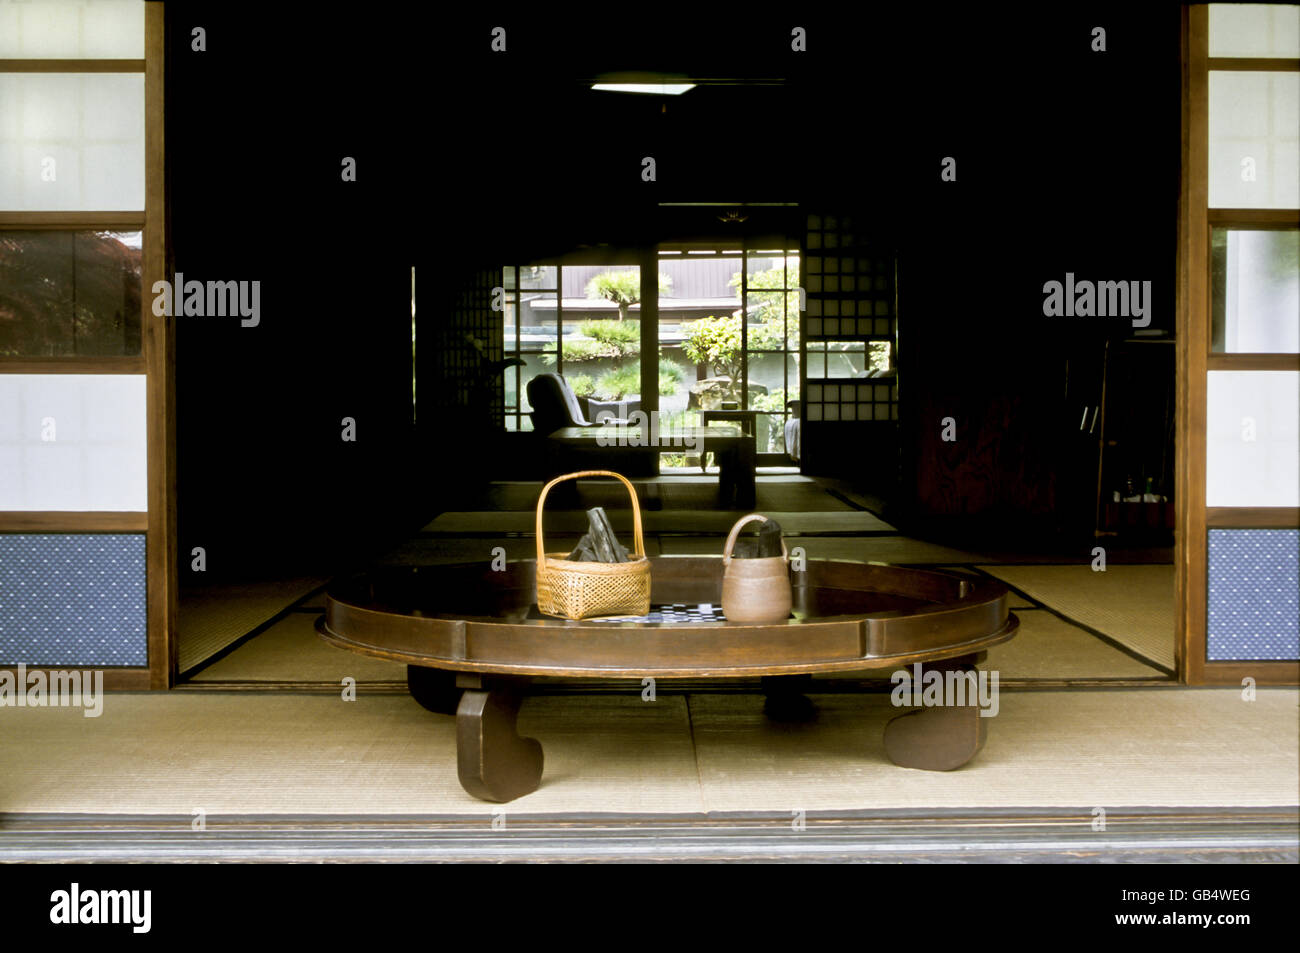 Round table with bambu basket and binchotan charcoal, private house, Japan, Asia Stock Photo